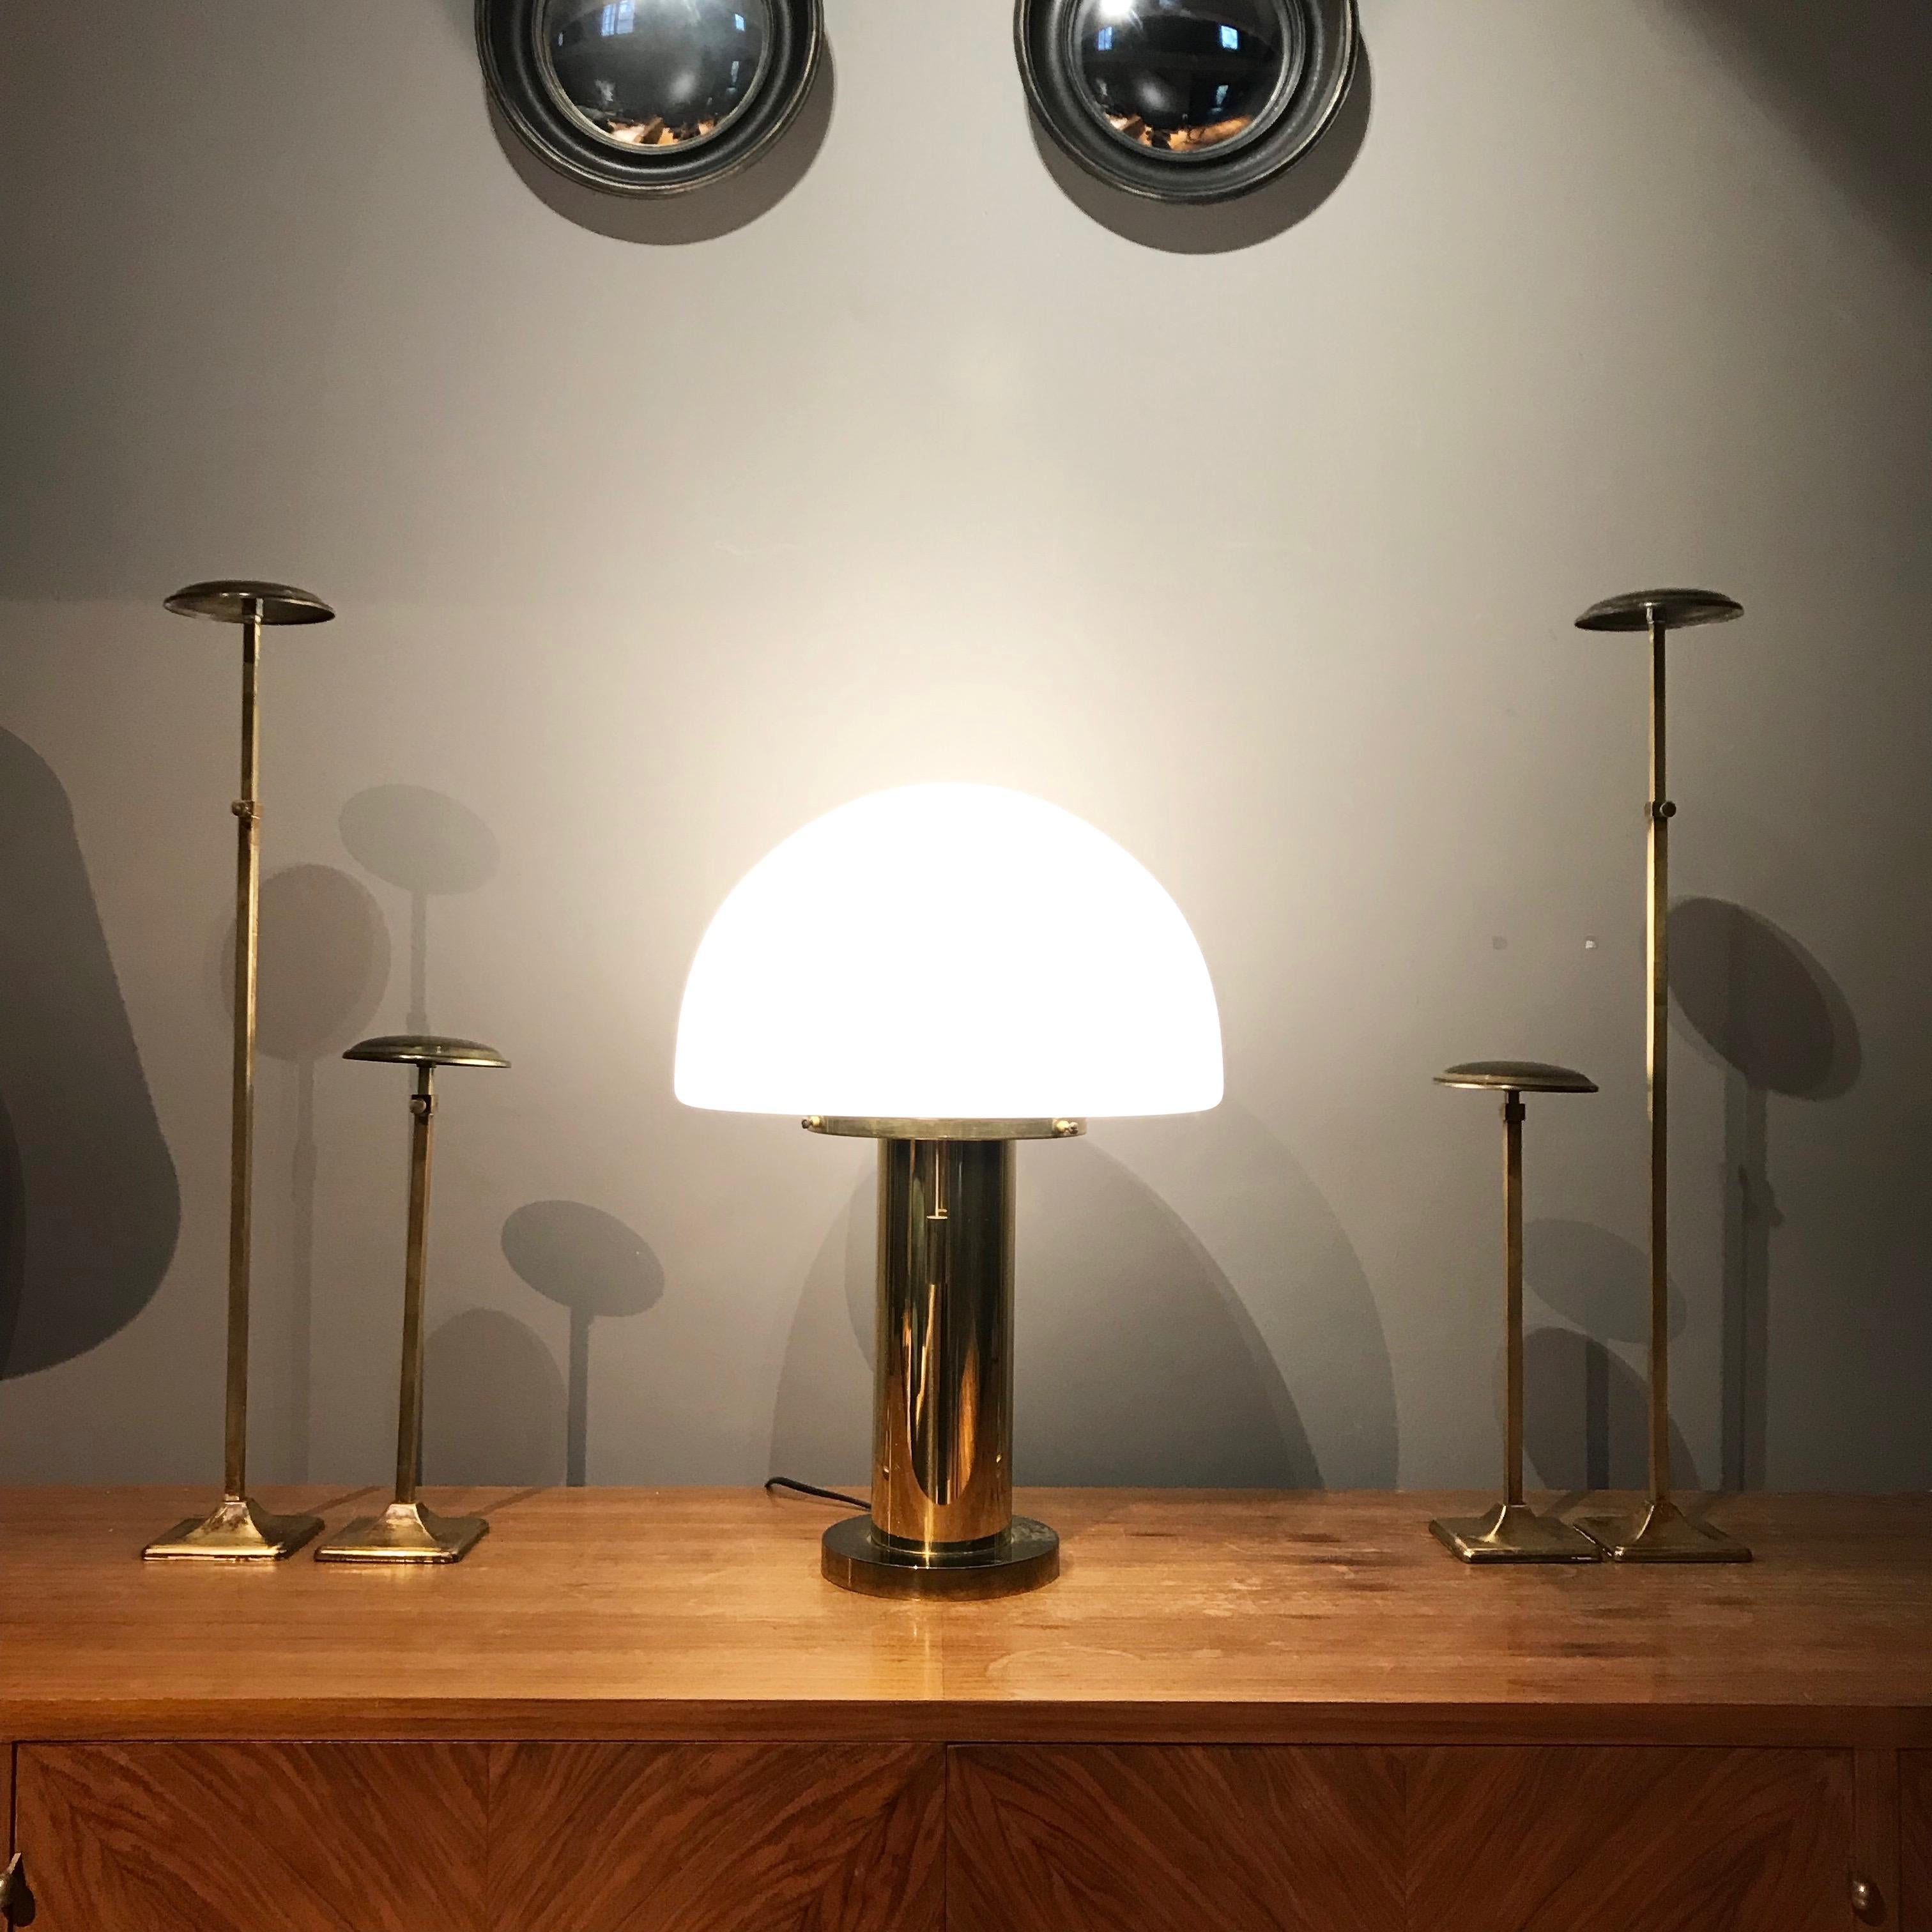 Simple and elegant space age sideboard lamp manufactured by Glashütte Limburg in Germany. The lamp is made of brass with heavy cast iron base. The mouth-blown lampshade that contains air bubbles provides smooth and wonderful light. The lamp is in